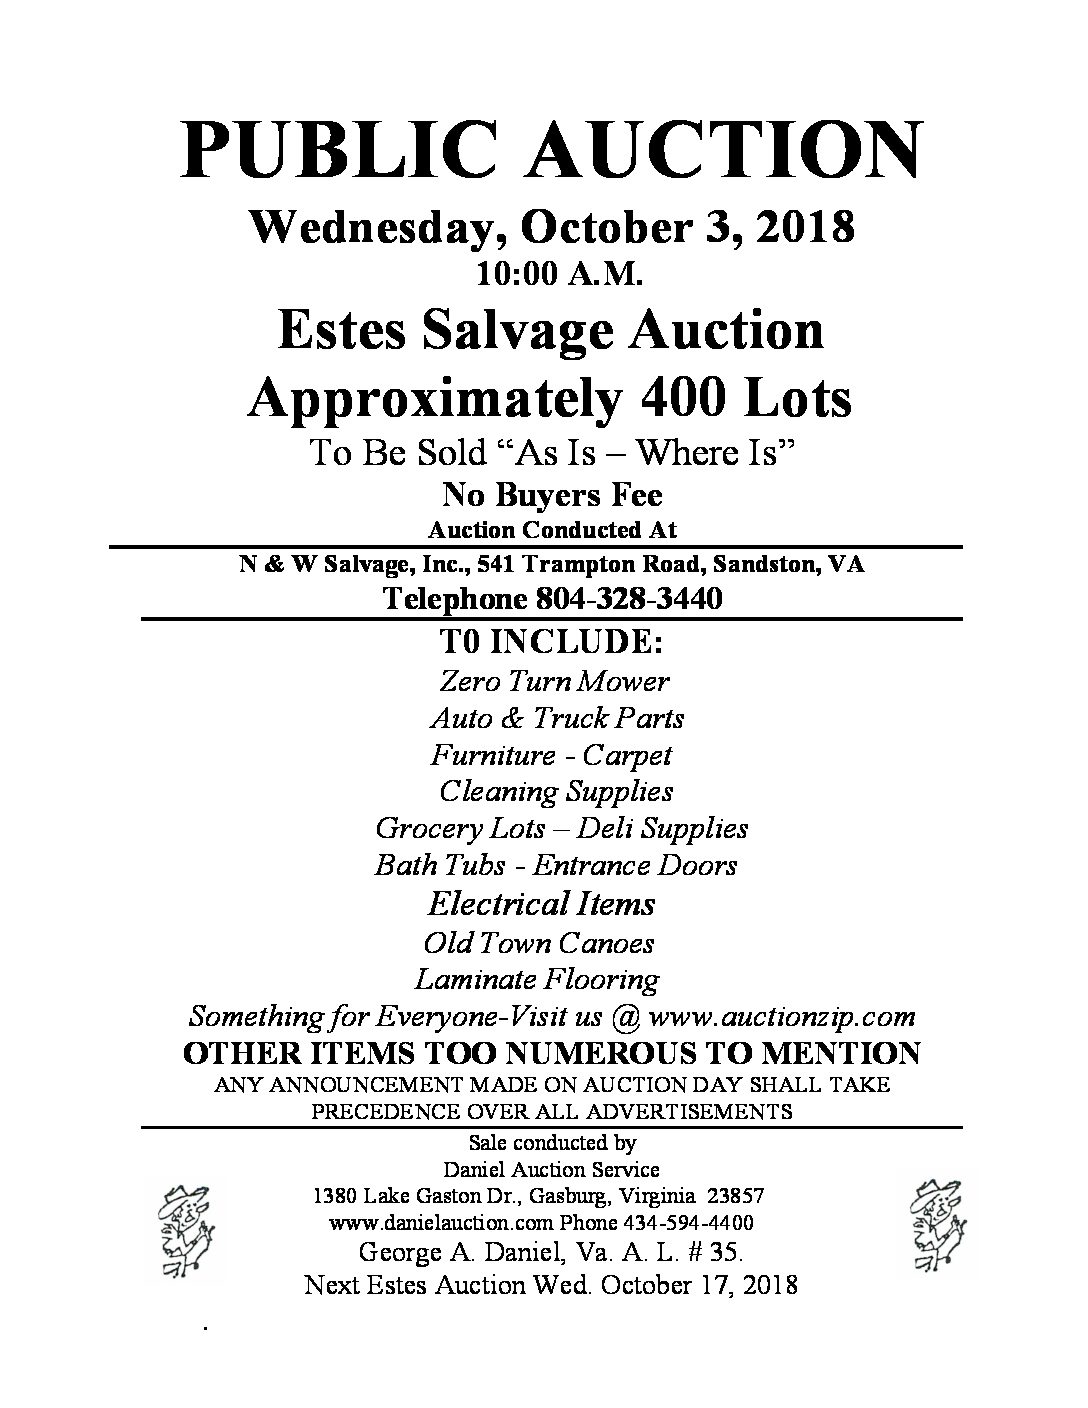 Wed Oct 3, 2018 Estes Salvage Auction